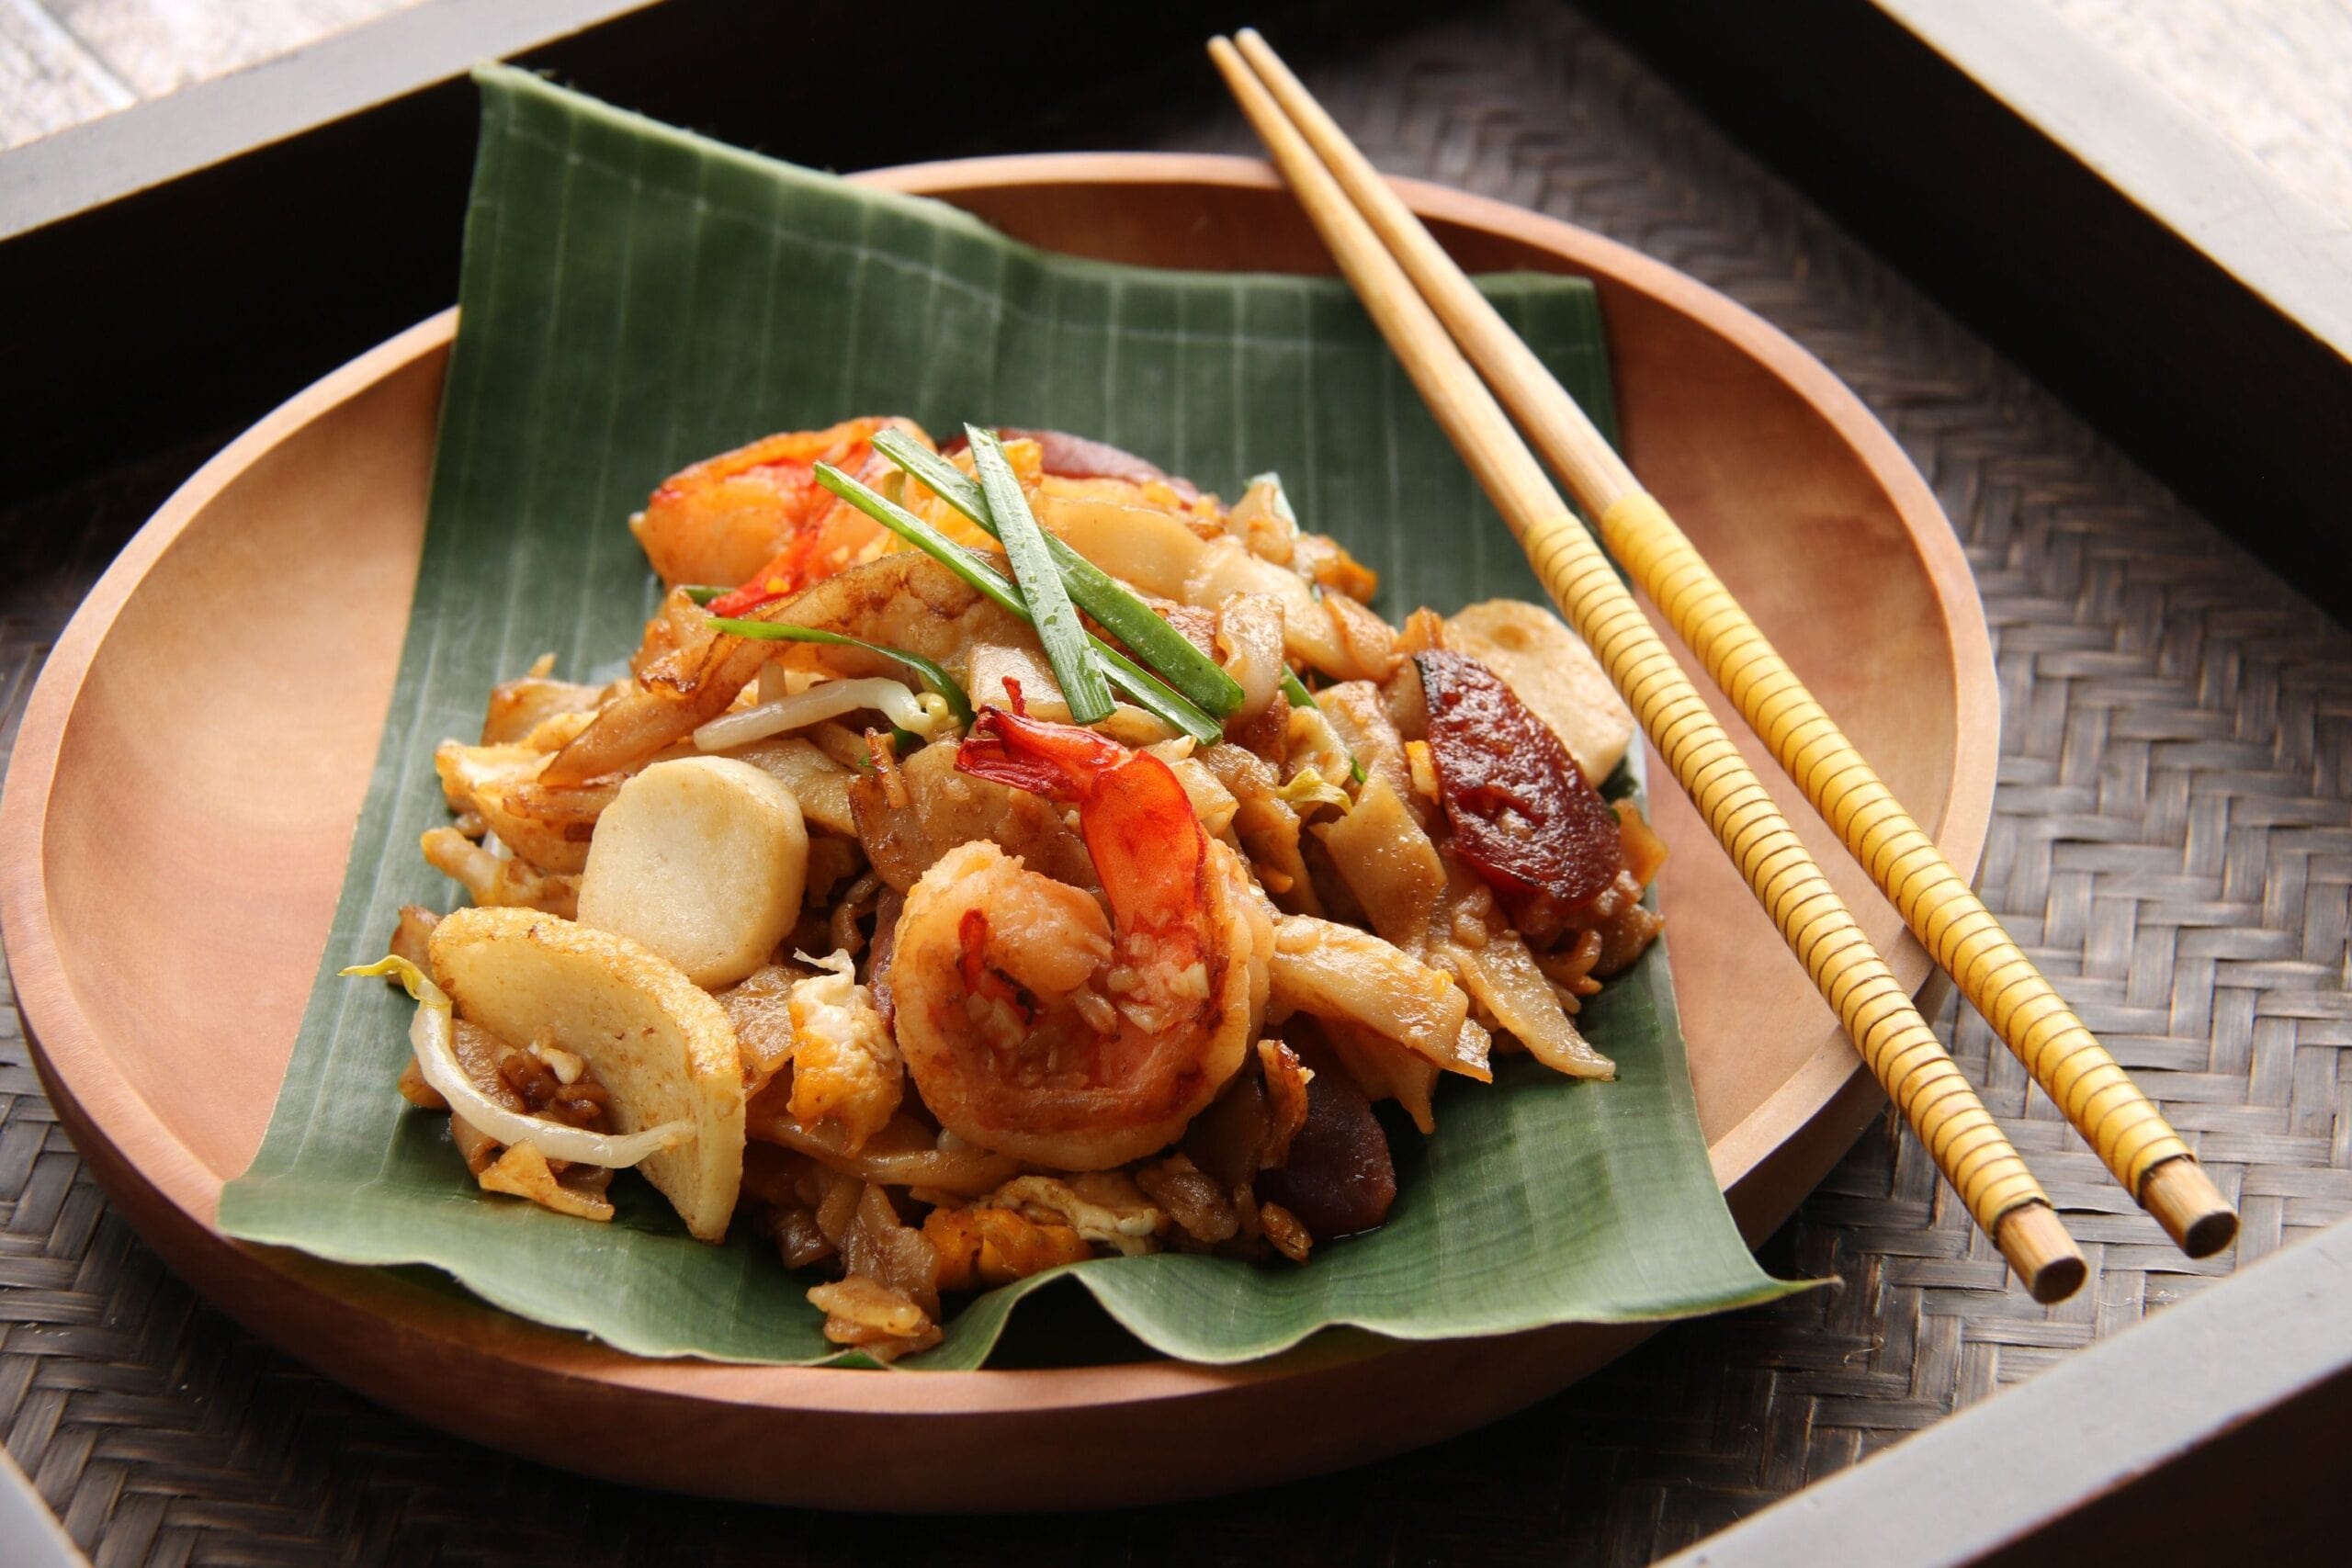 The best way to have this dish is to stir fried with plenty of dark soy sauce, cockles, fishcake, prawns and eggs. What is this dish called?